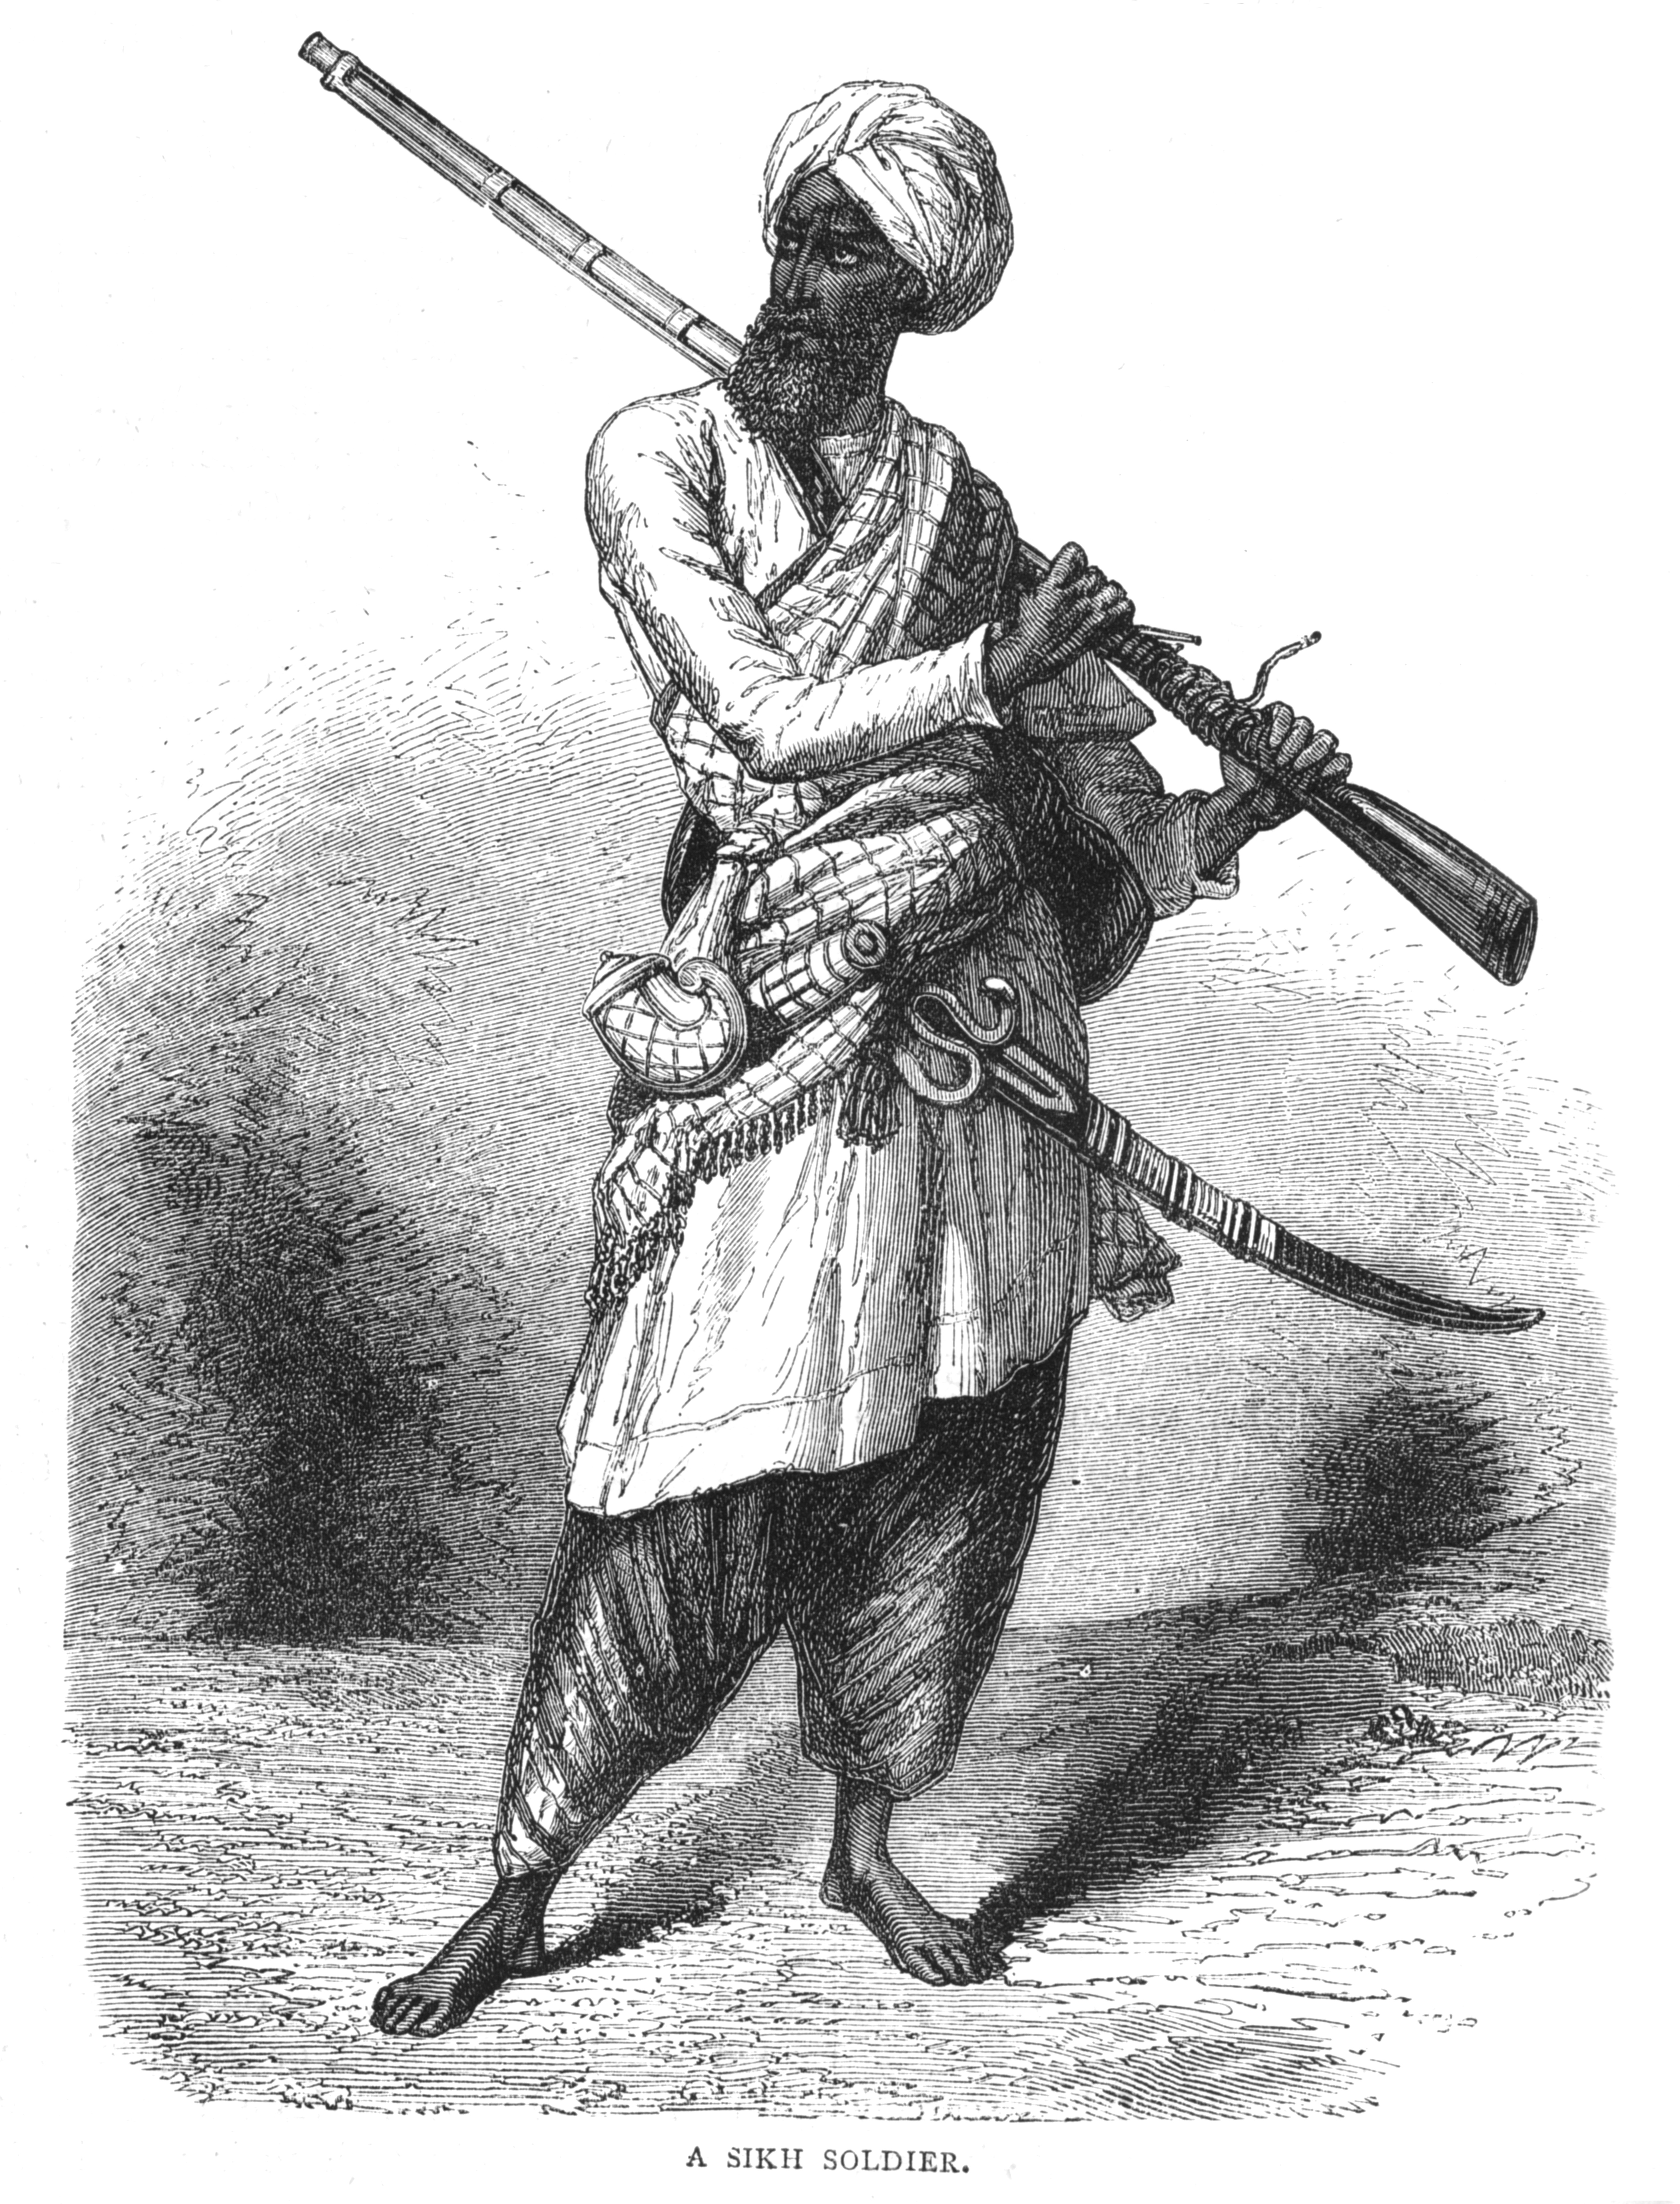 Illustration of a Sikh soldier holding a rifle